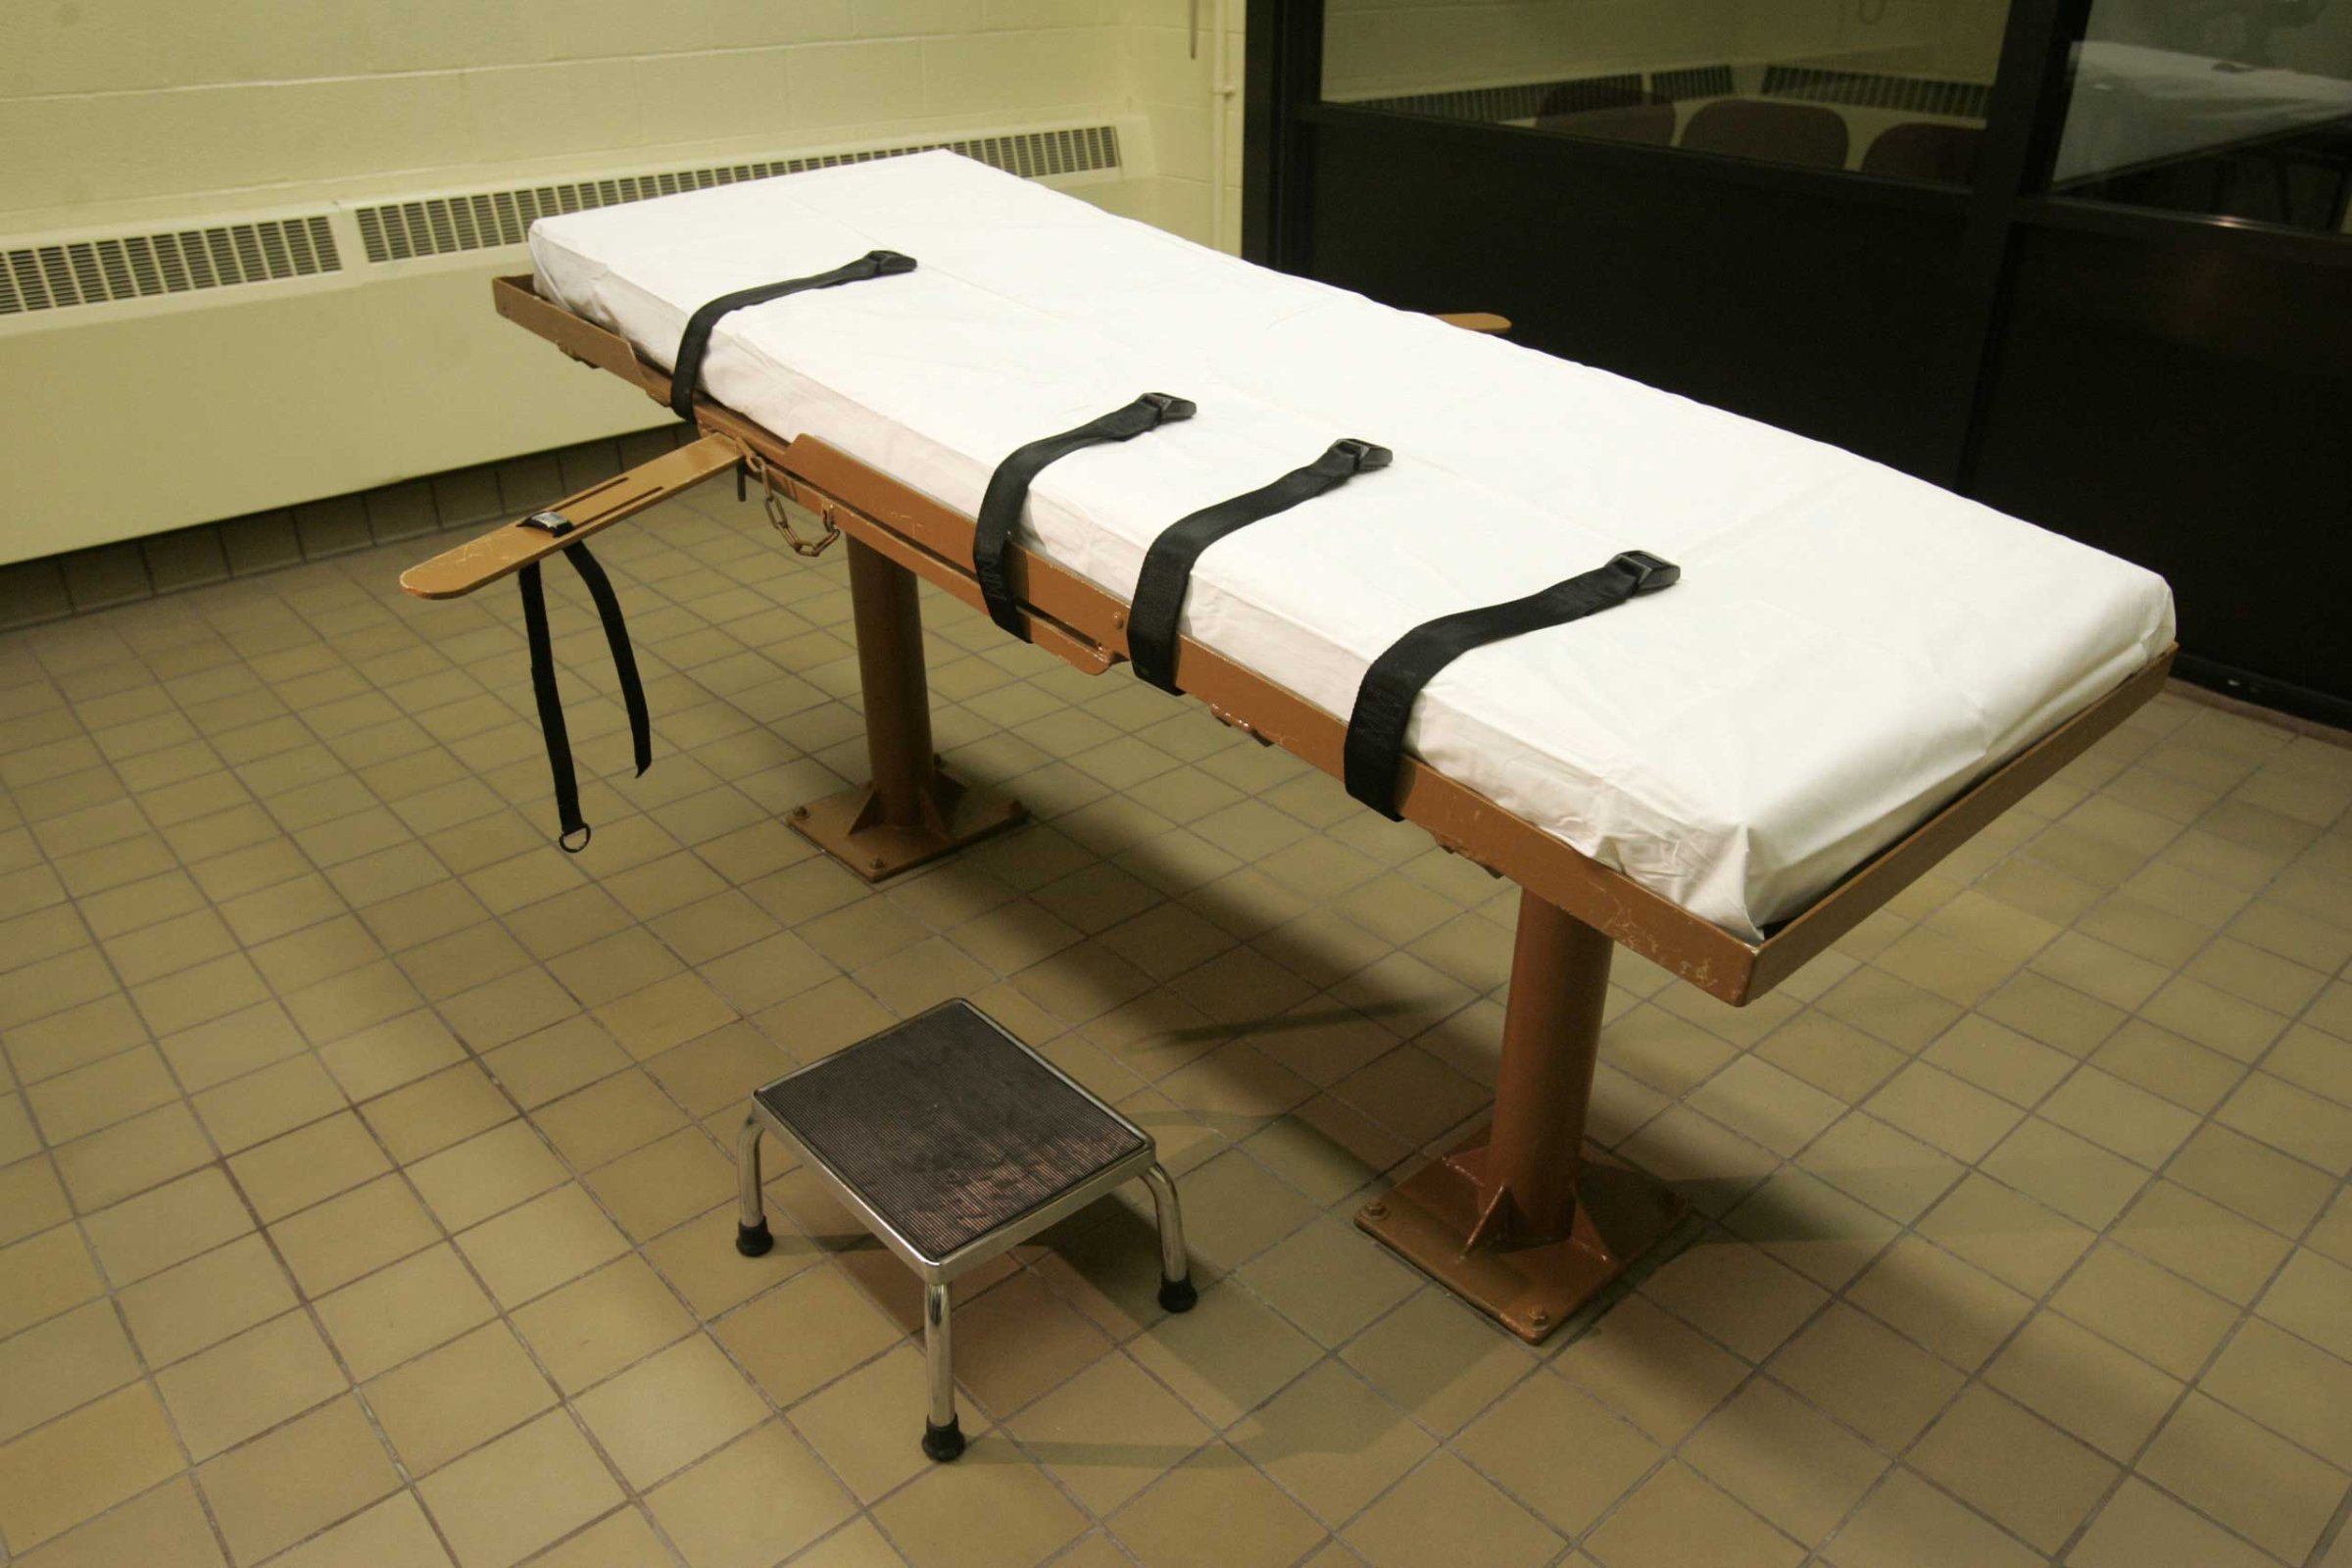 The death chamber at the Southern Ohio Correctional Facility in Lucasville, Ohio, in 2005.